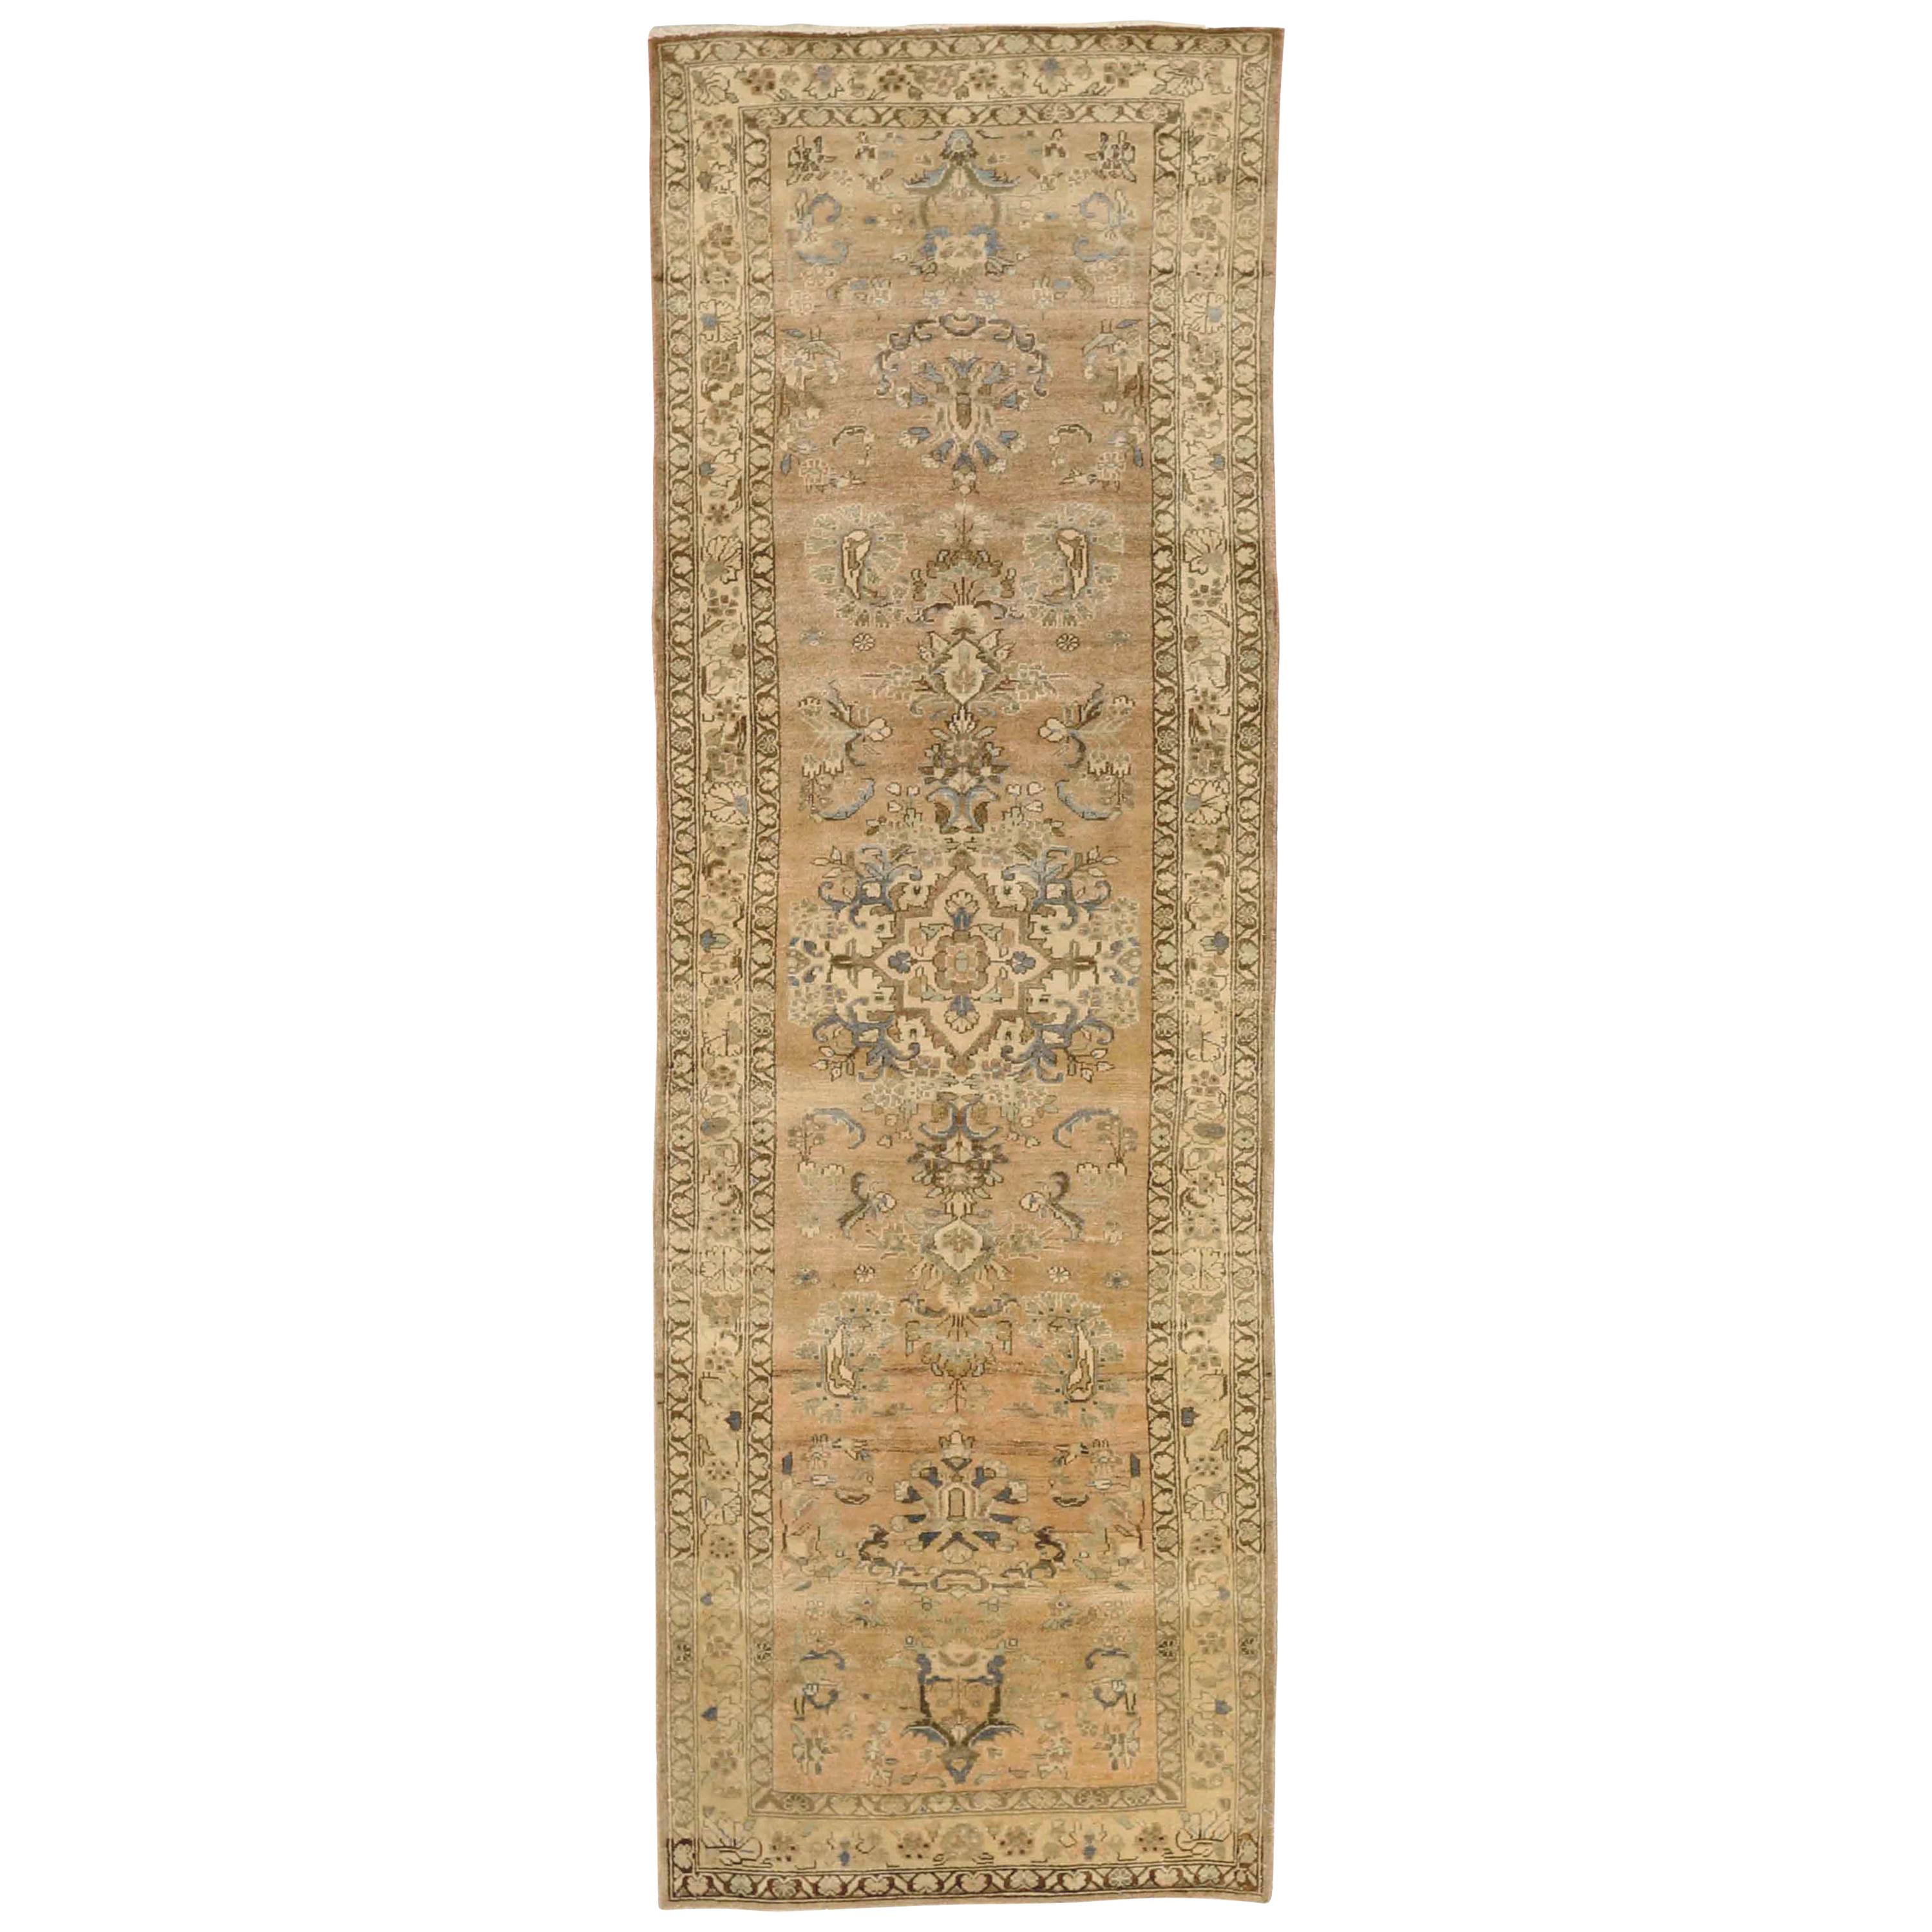 Antique Persian Malayer Runner Rug with Floral Details on Ivory Field